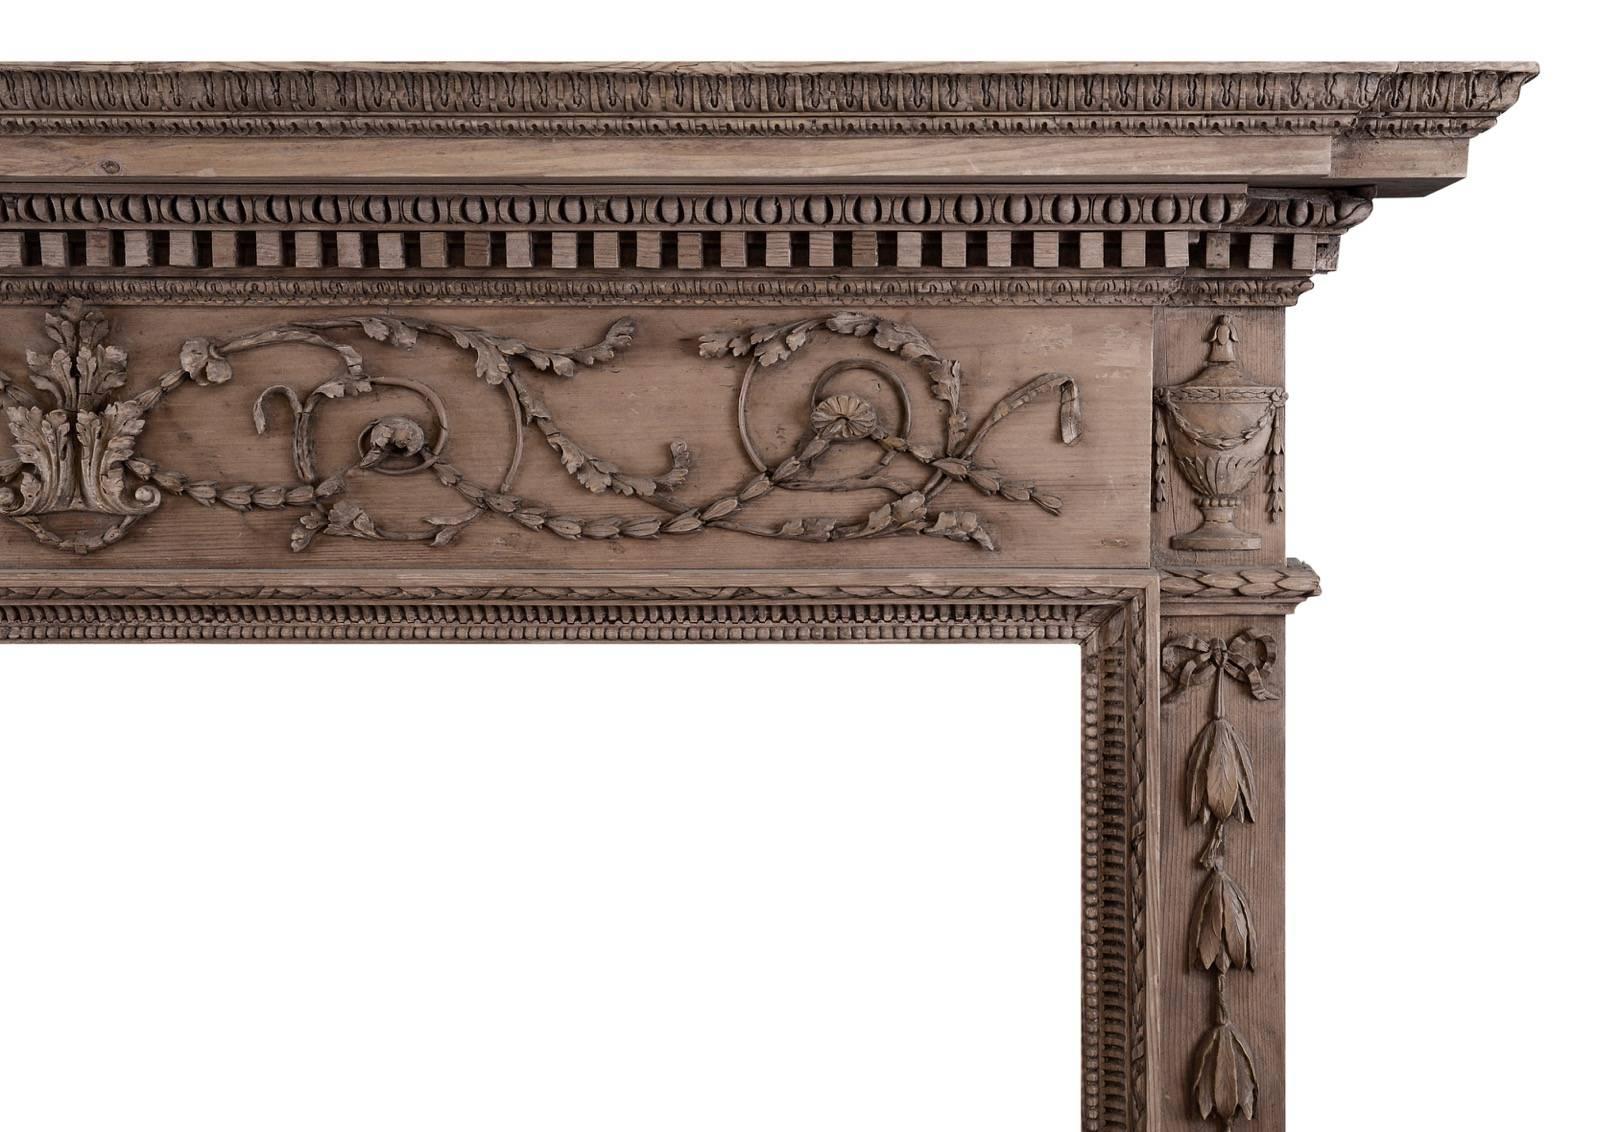 A fine quality late Georgian carved pine fireplace. The frieze with delicate carving of acanthus leaf central motif leading to flowing scrolled foliage and paterae. The jambs with tied ribbons and bellflower drops, carved leg moulding with beading,